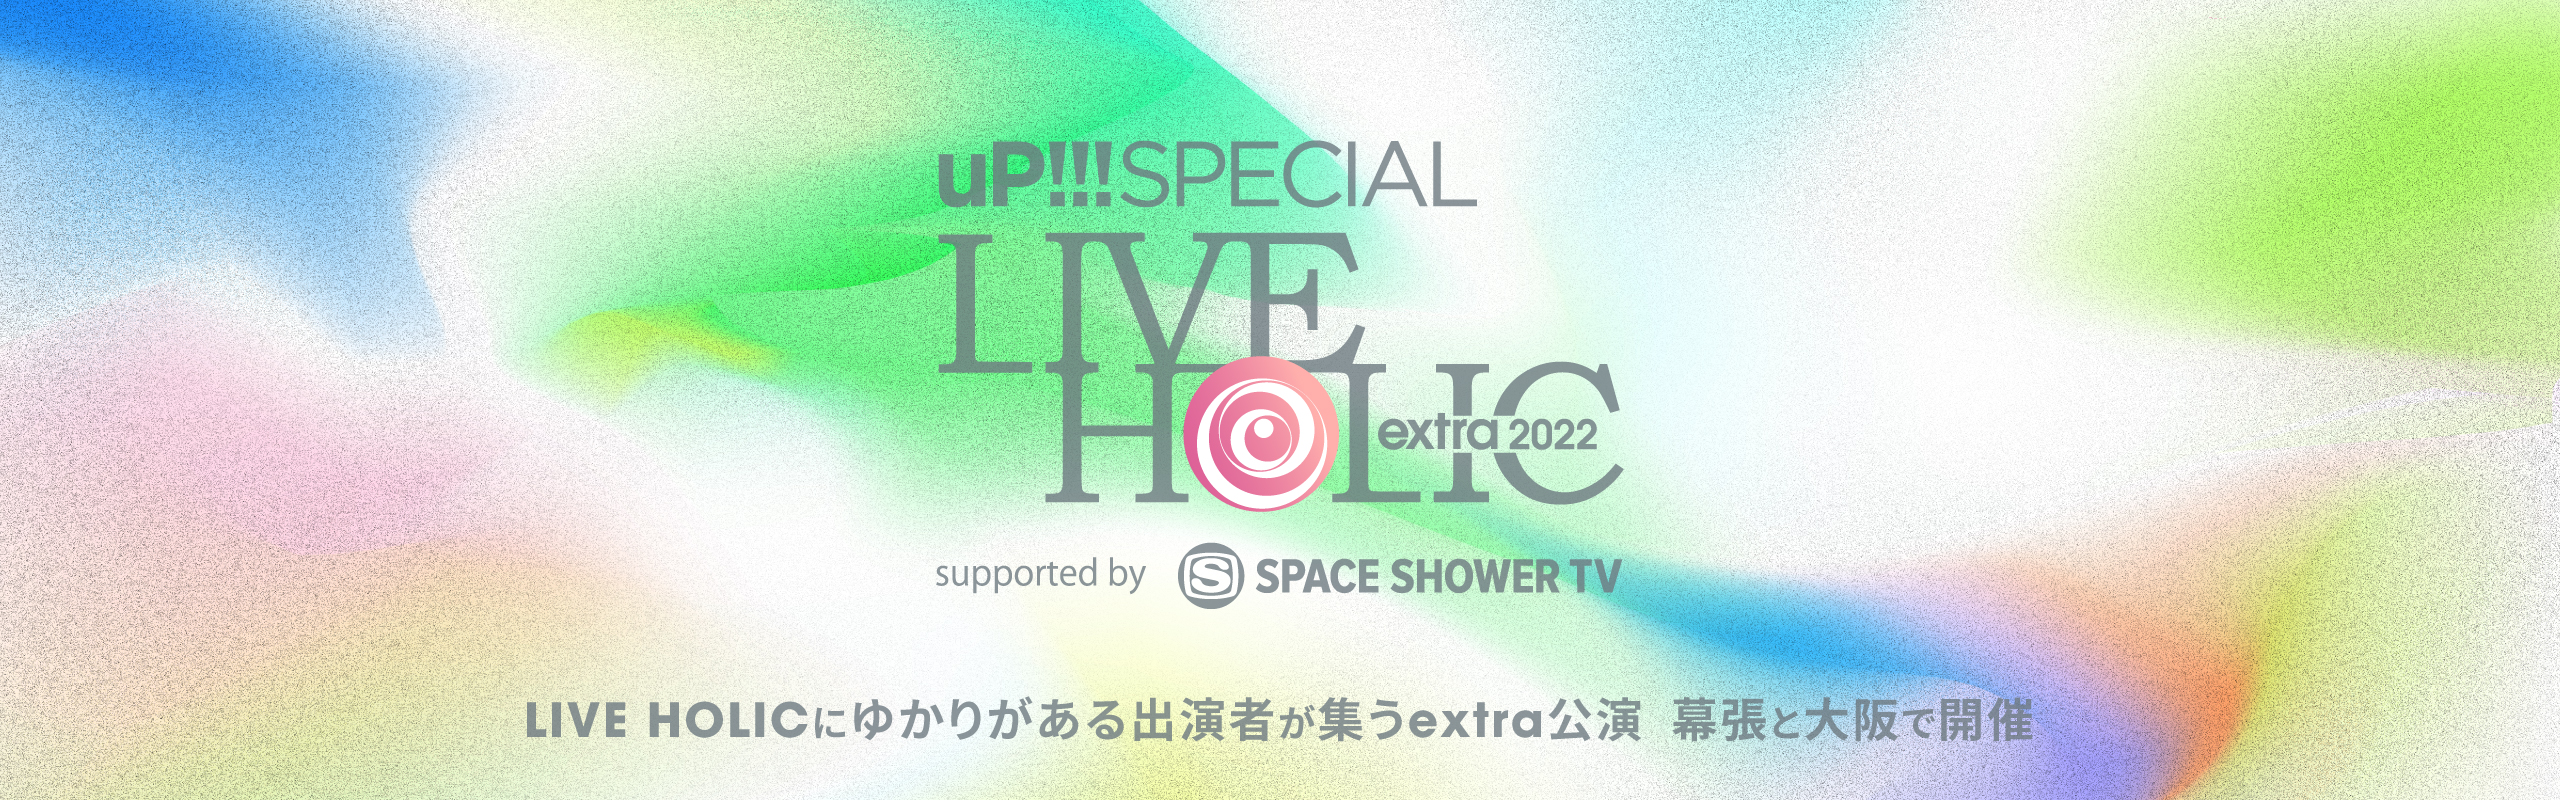 up!!! SPECIAL LIVE HOLIC extra 2022 supported by SPACE SHOWER TV LIVE HOLICにゆかりのある出演者が集うextra公演 幕張と大阪で開催